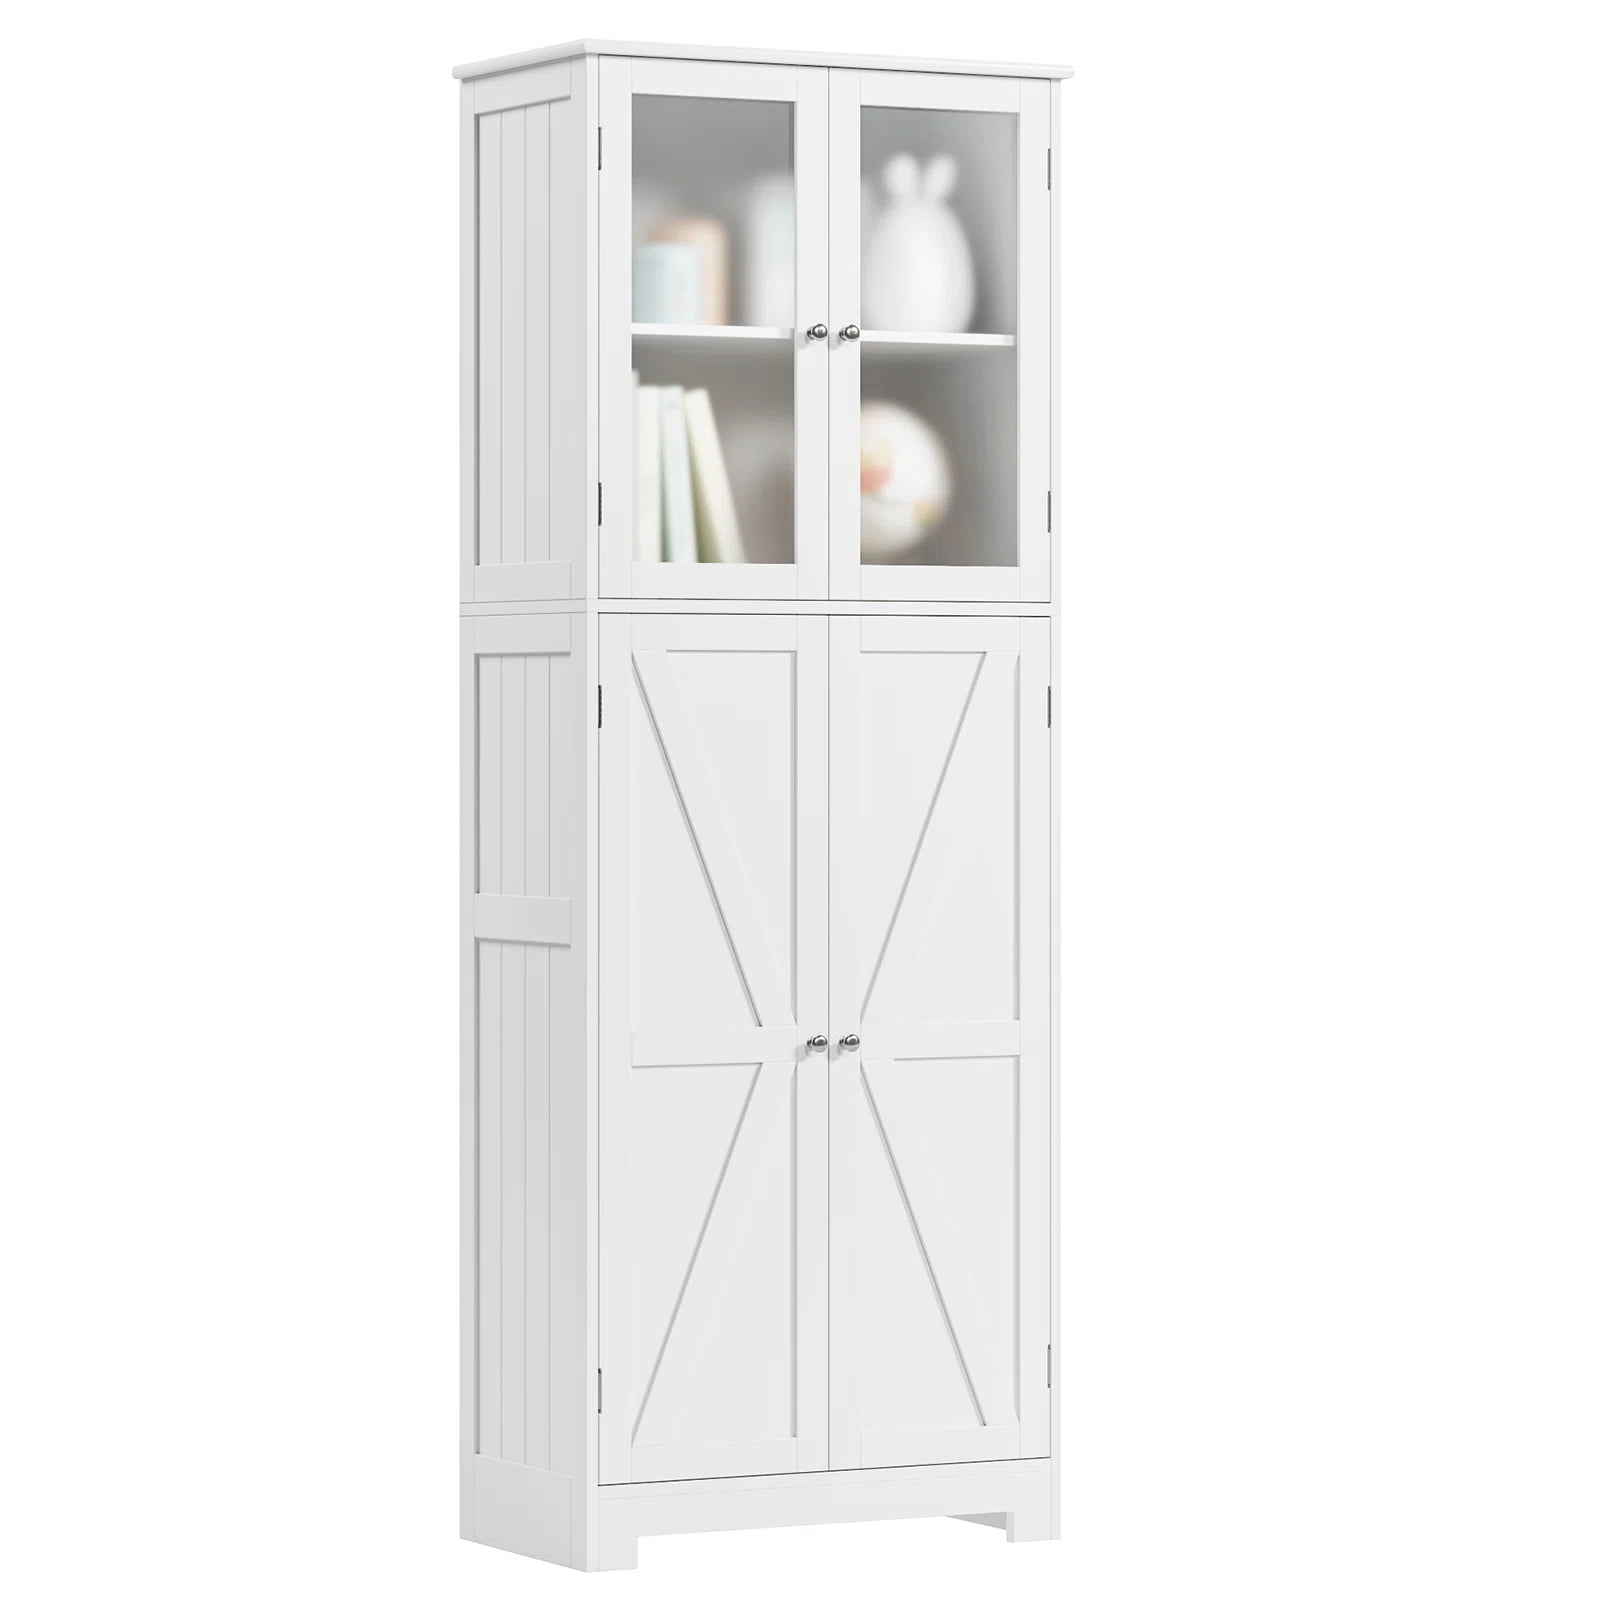 Homhedy 67 H Tall Bathroom Storage Cabinet，Storage Cabinet, Floor Cabinet  for Living Room, Entryway, Kitchen, Bedroom - AliExpress